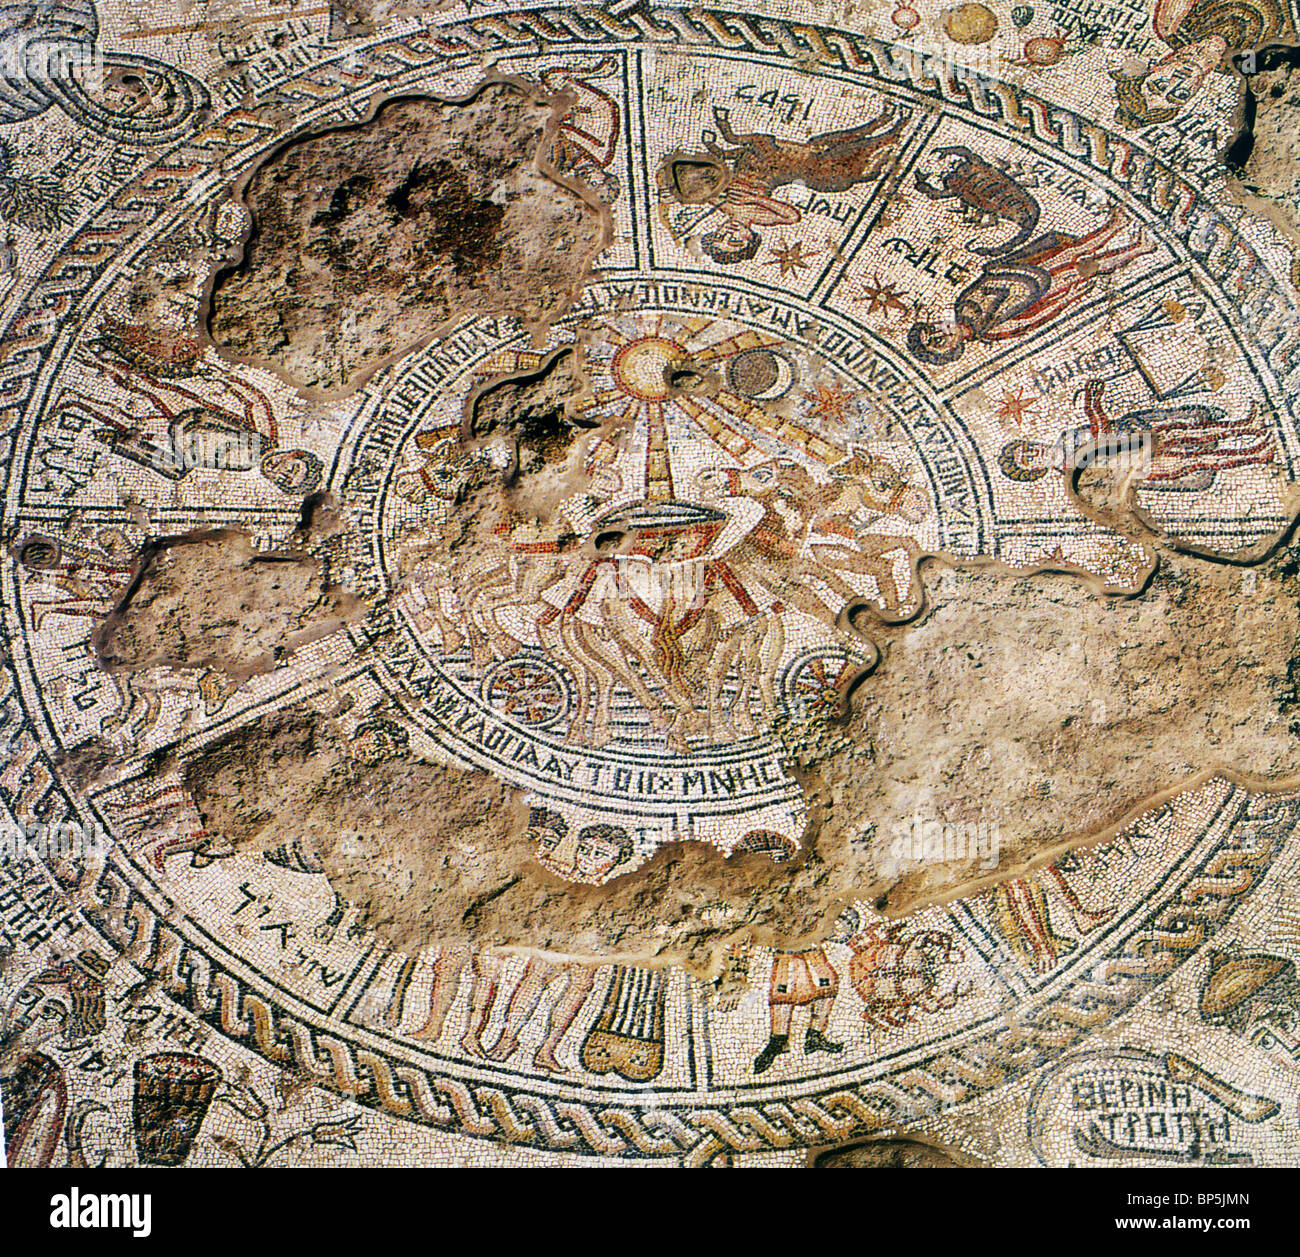 SEPPHORIS SYNAGOGUE DATING FROM C. 5TH. C. AD. DETAIL OF THE MOSAIC FLOOR DEPICTING THE ZODIAC WITH THE SUN-GOD HELIUS IN THE Stock Photo